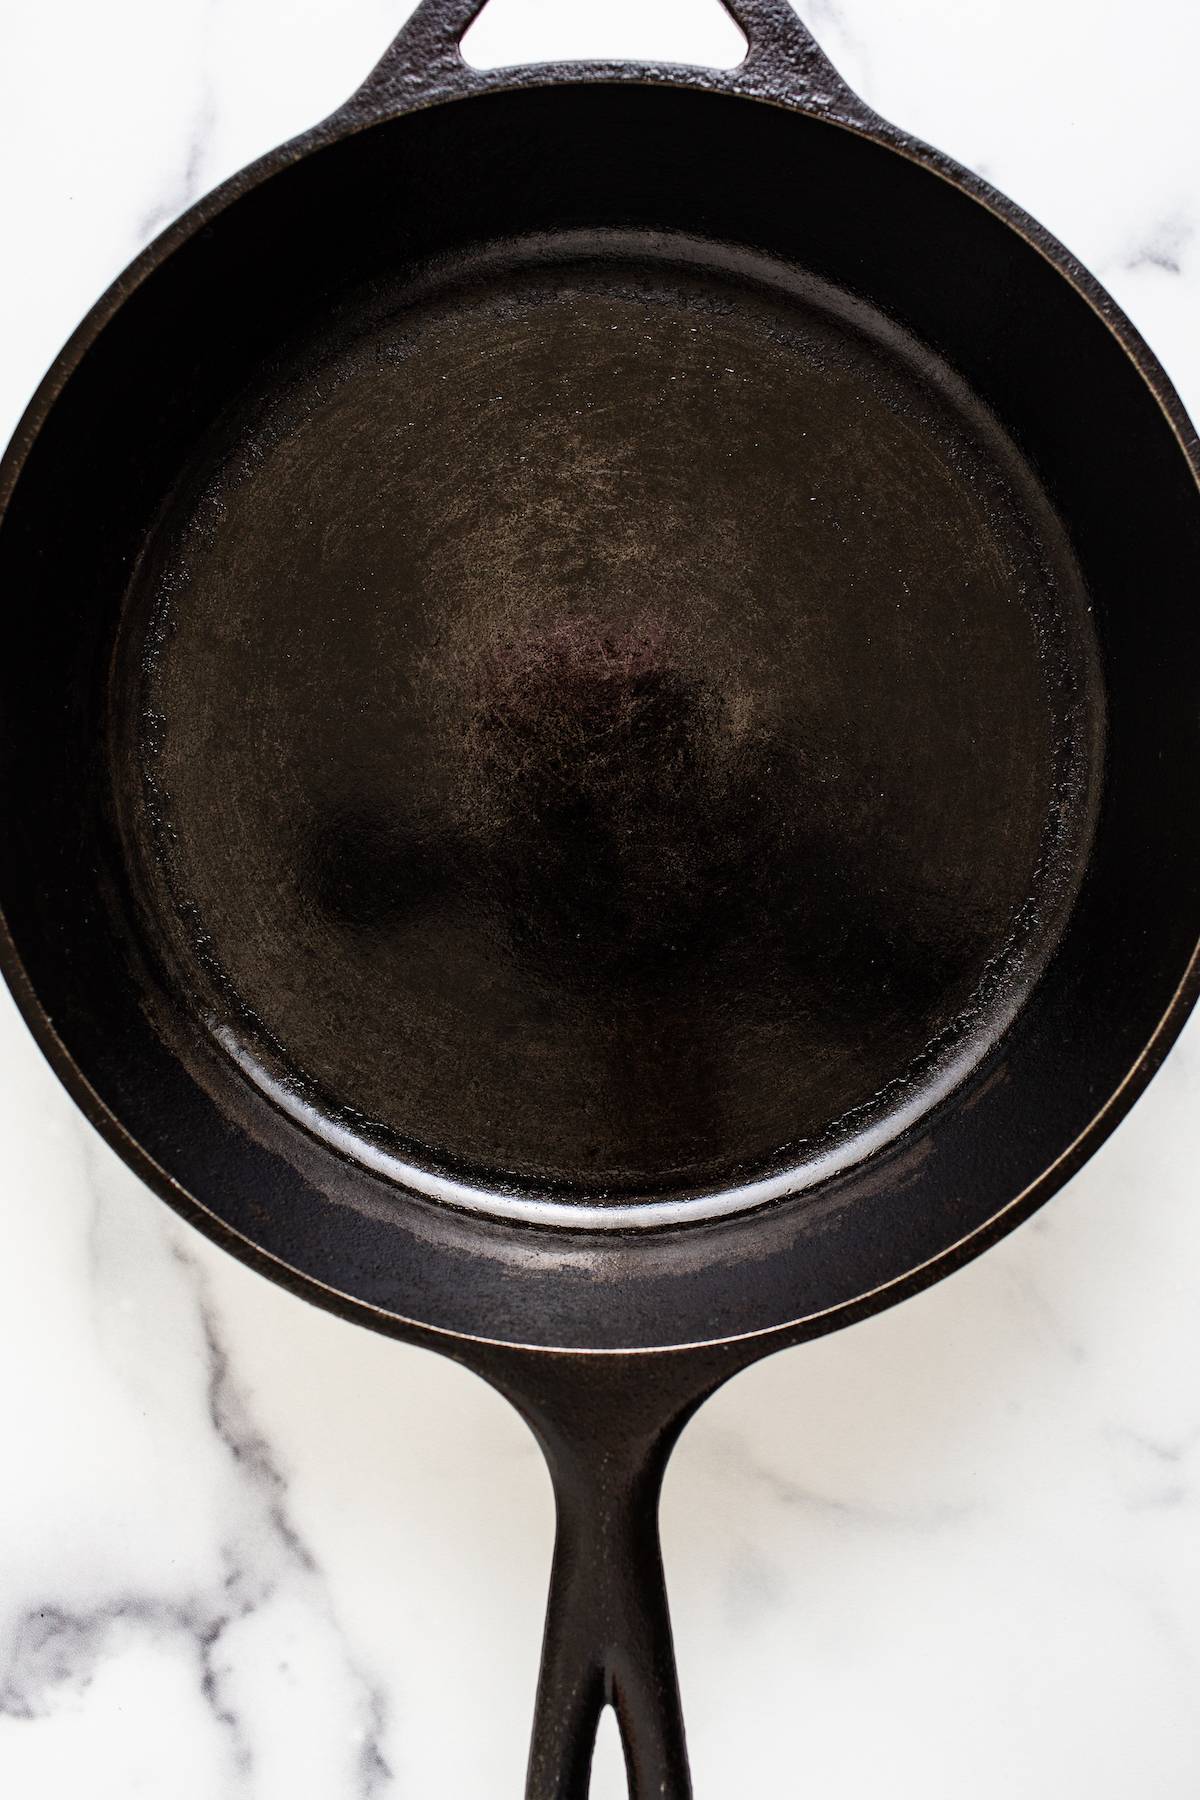 Clean and seasoned cast iron skillet.